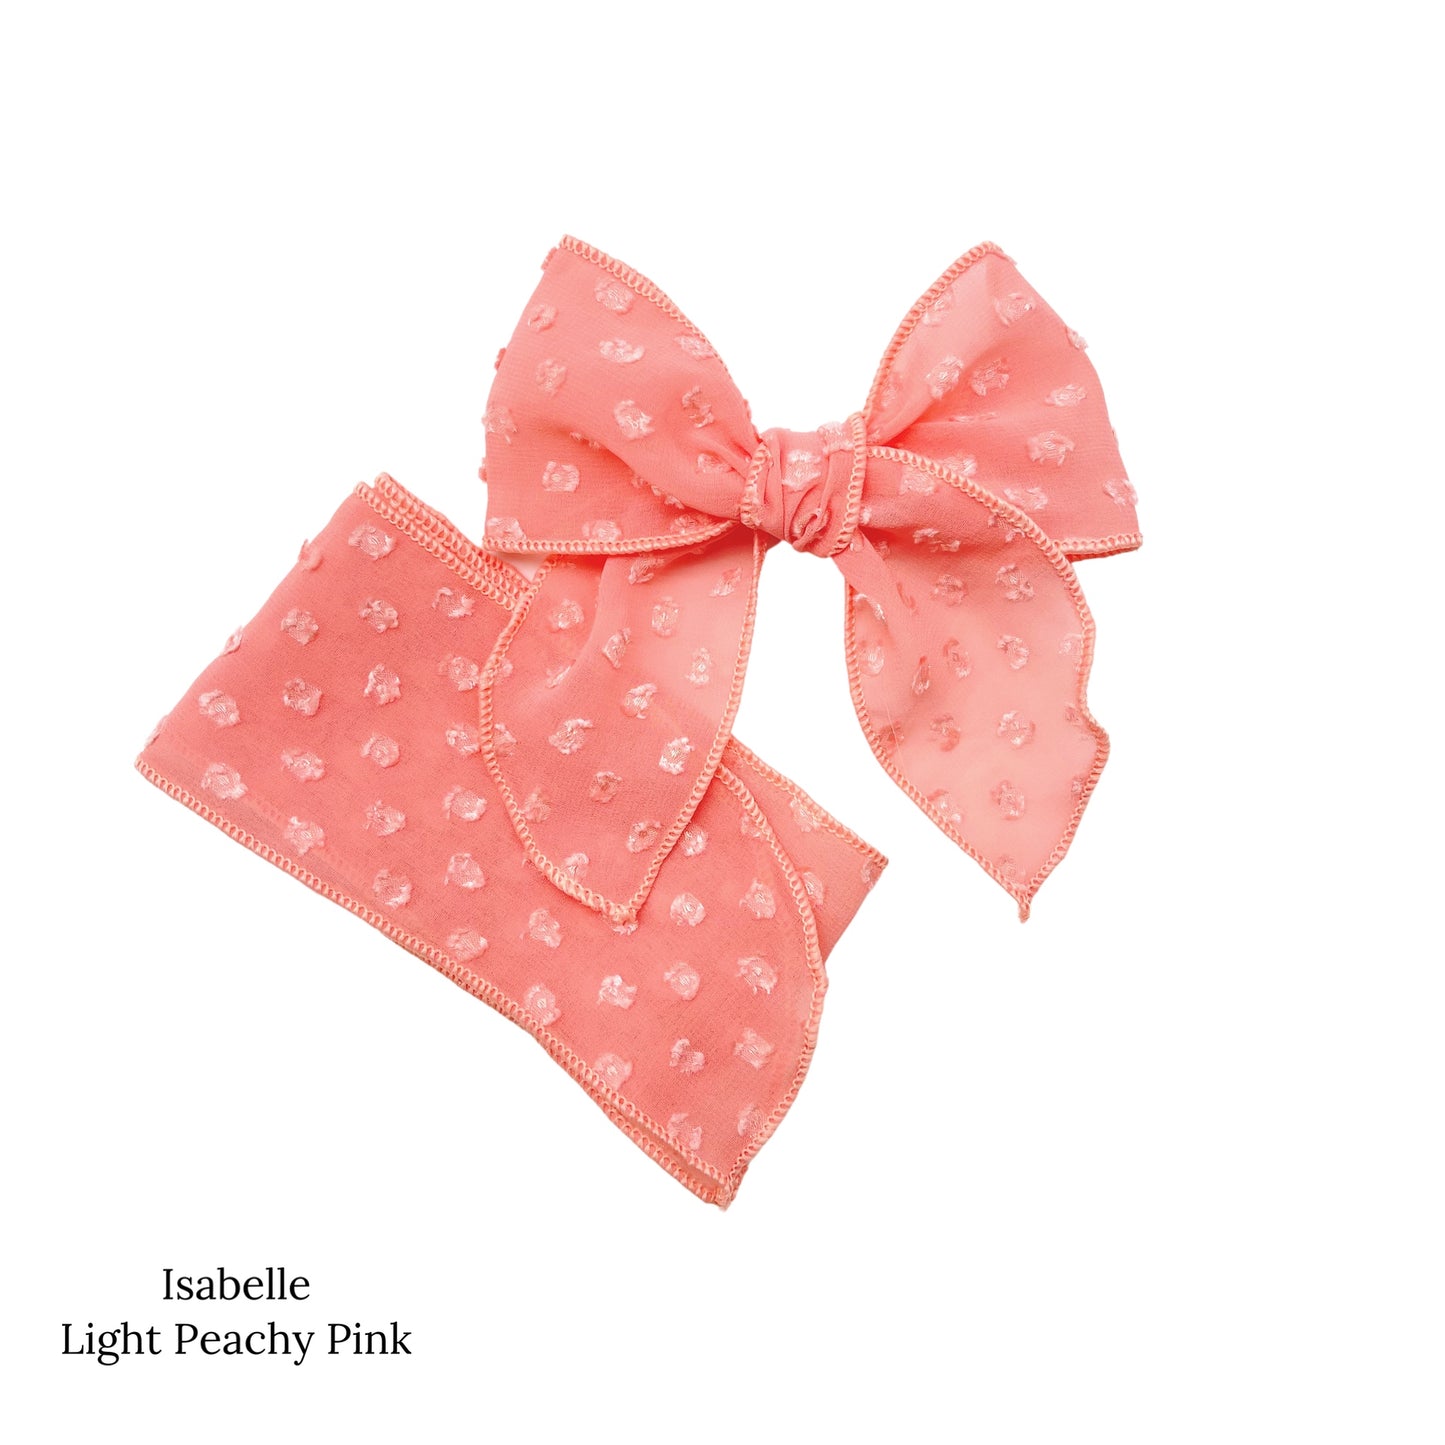 Spring frayed dot fabric bow strips. Light peachy pink colored serger style bow strip. 